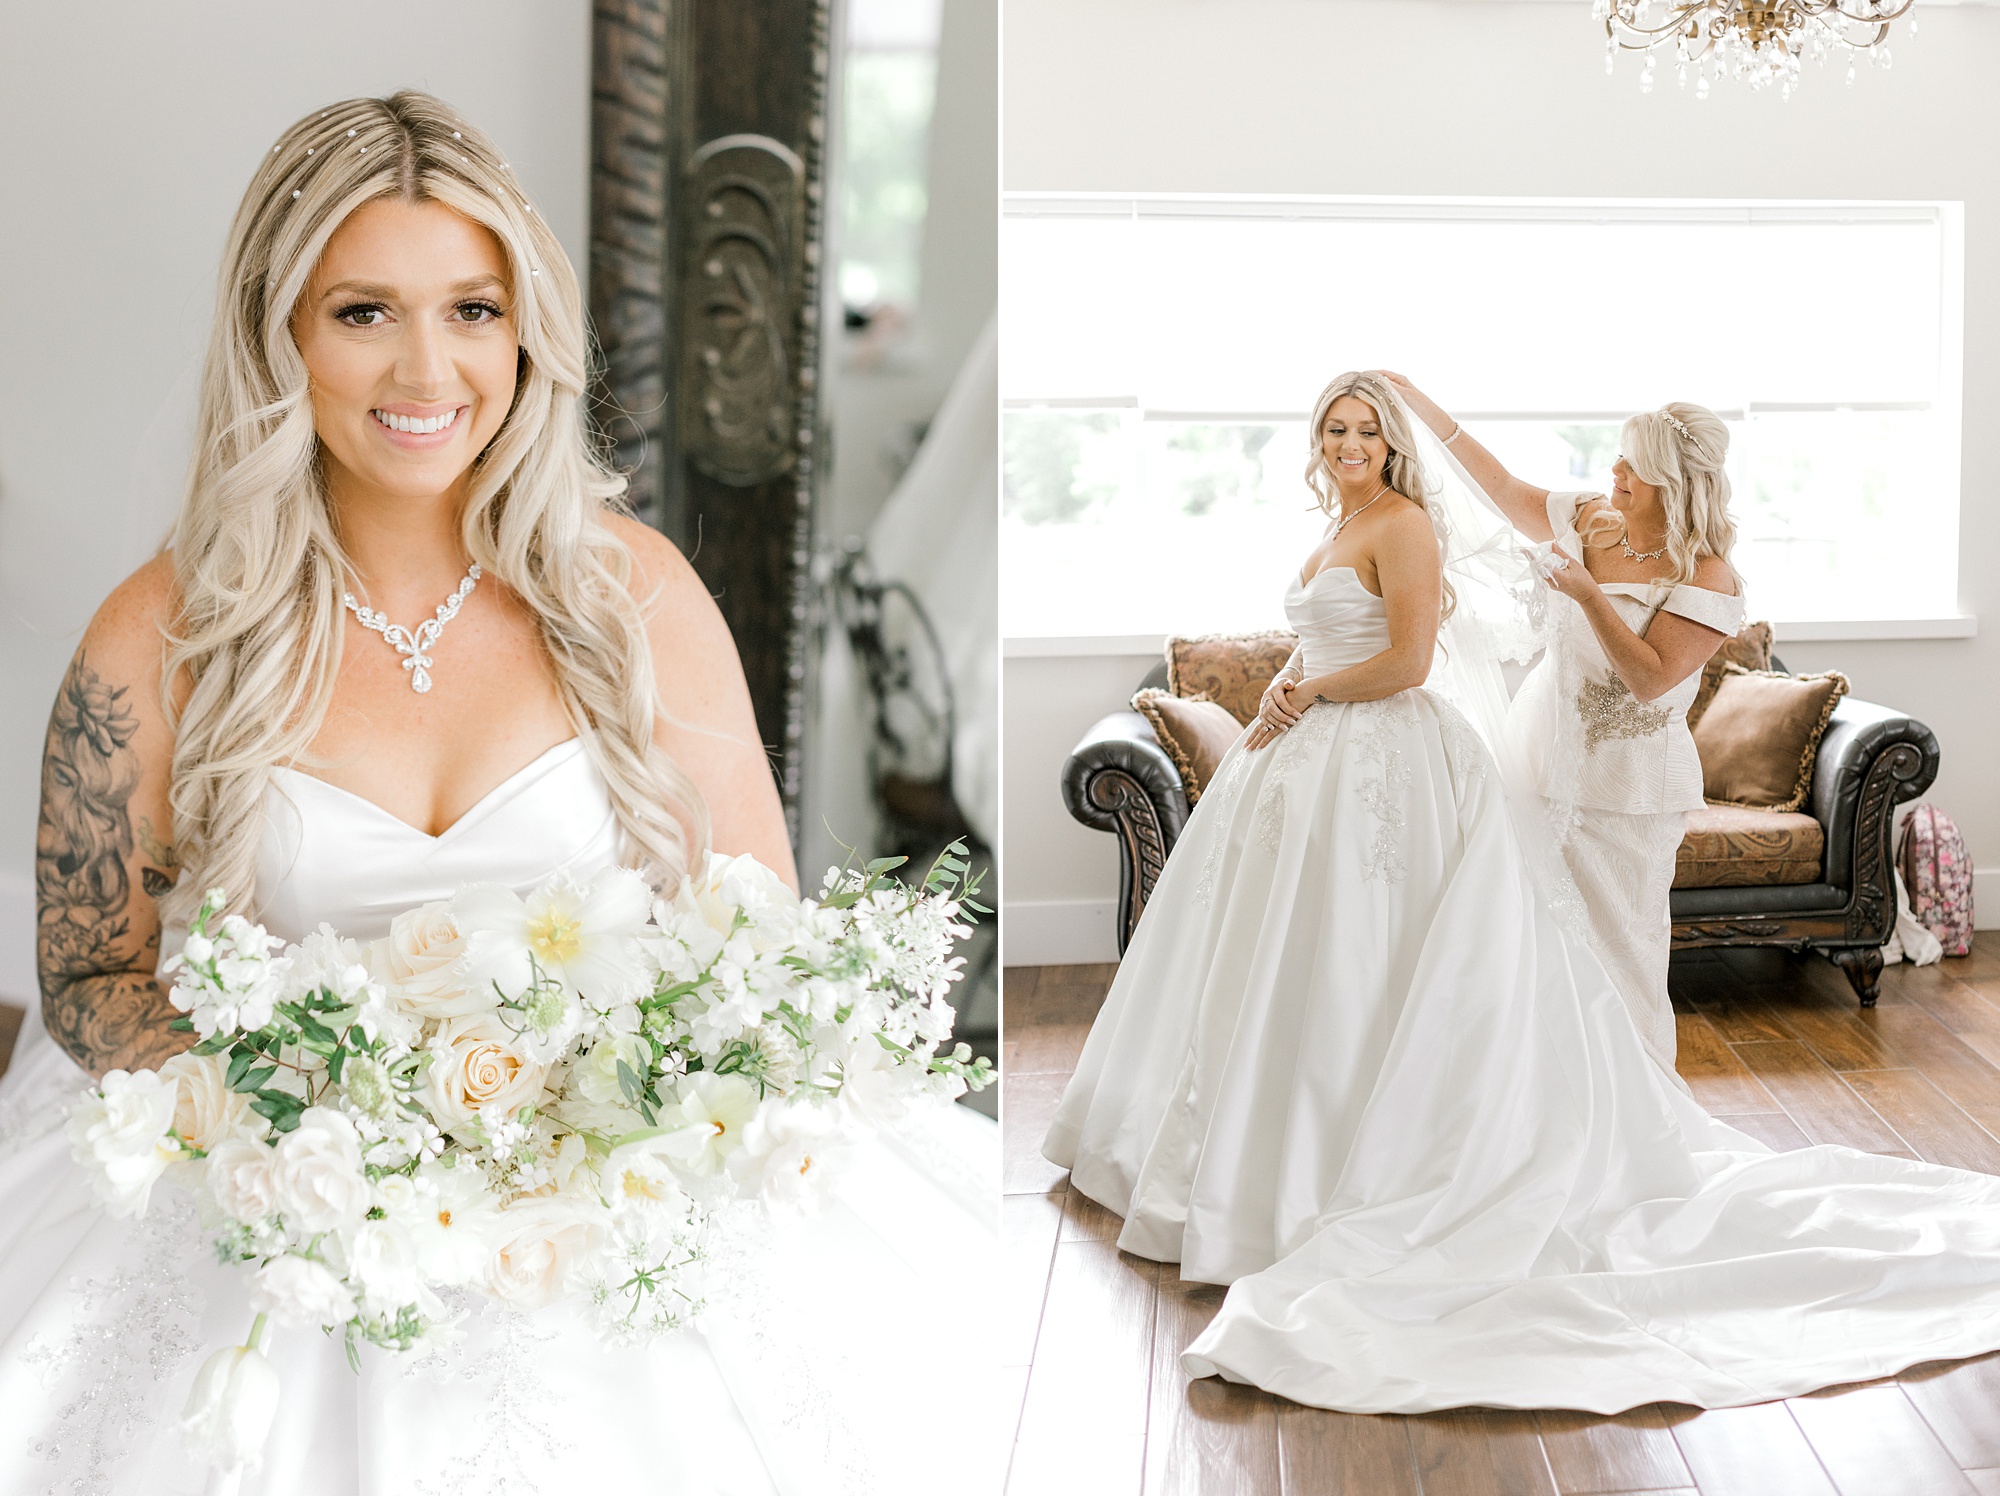 mother of the bride places veil in bride's hair by mirror in bridal suite